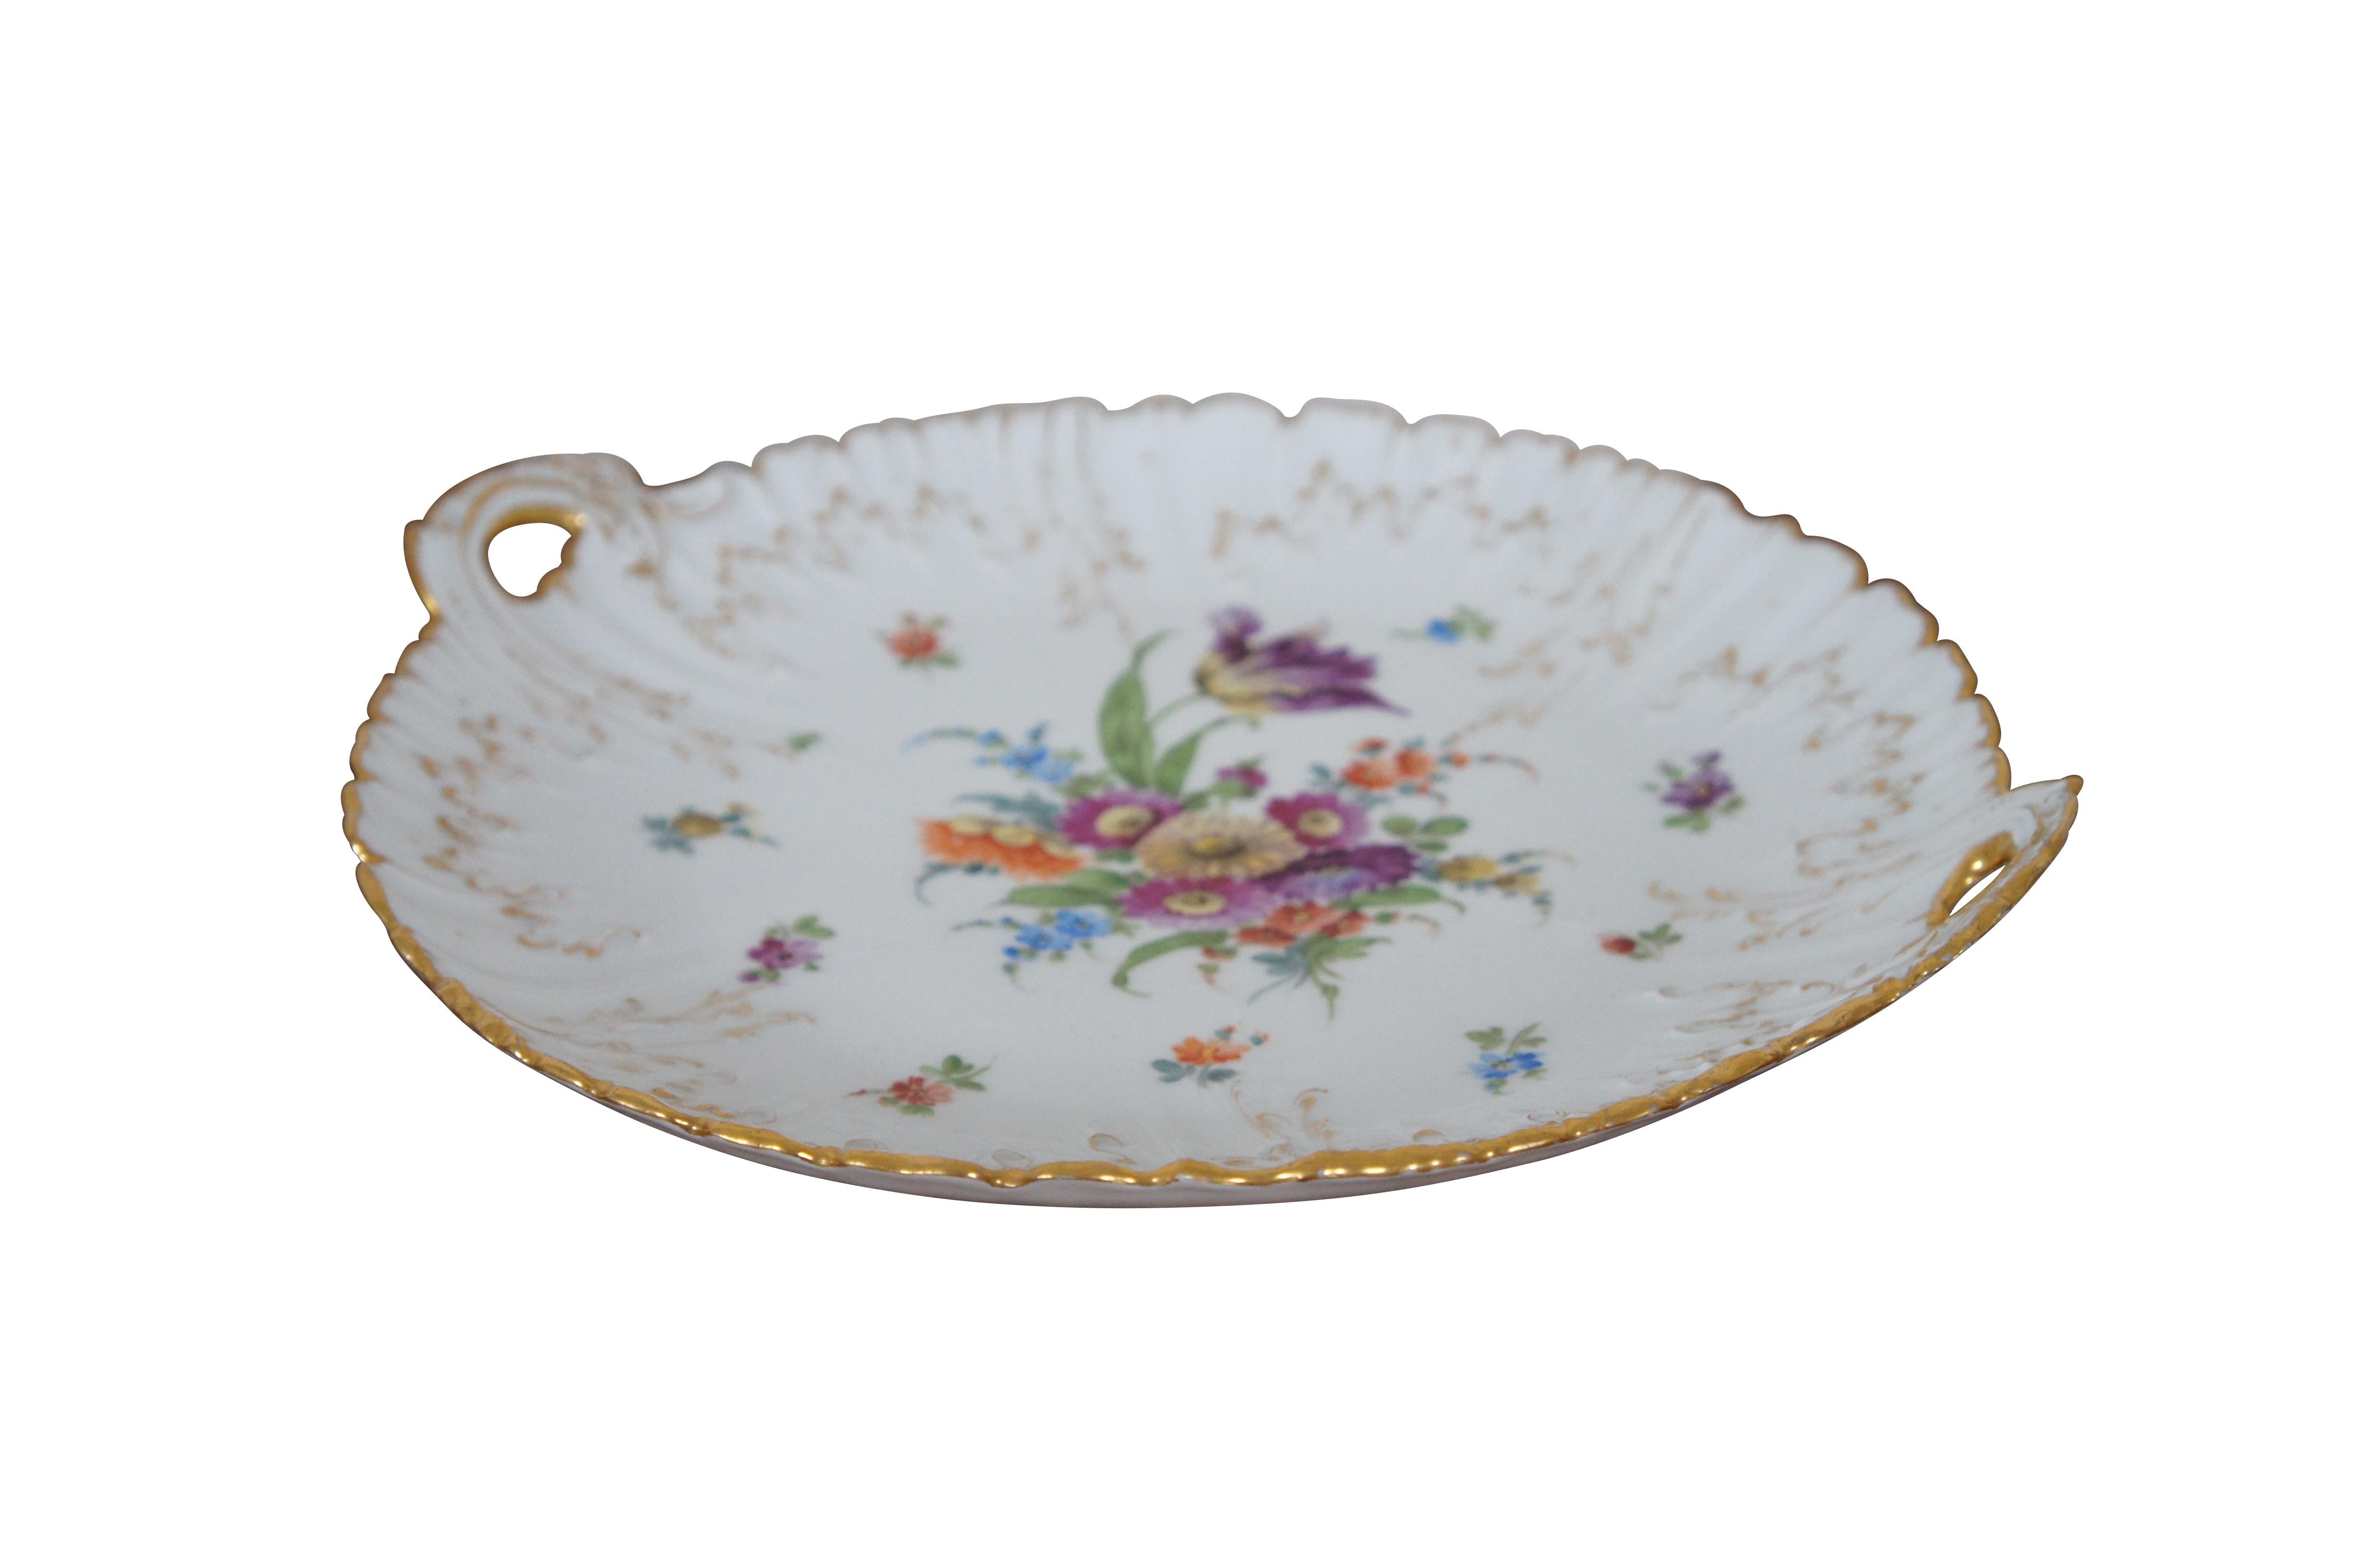 Antique Richard Klemm cake plate or platter featuring floral motif with handles and scalloped gold rim.

